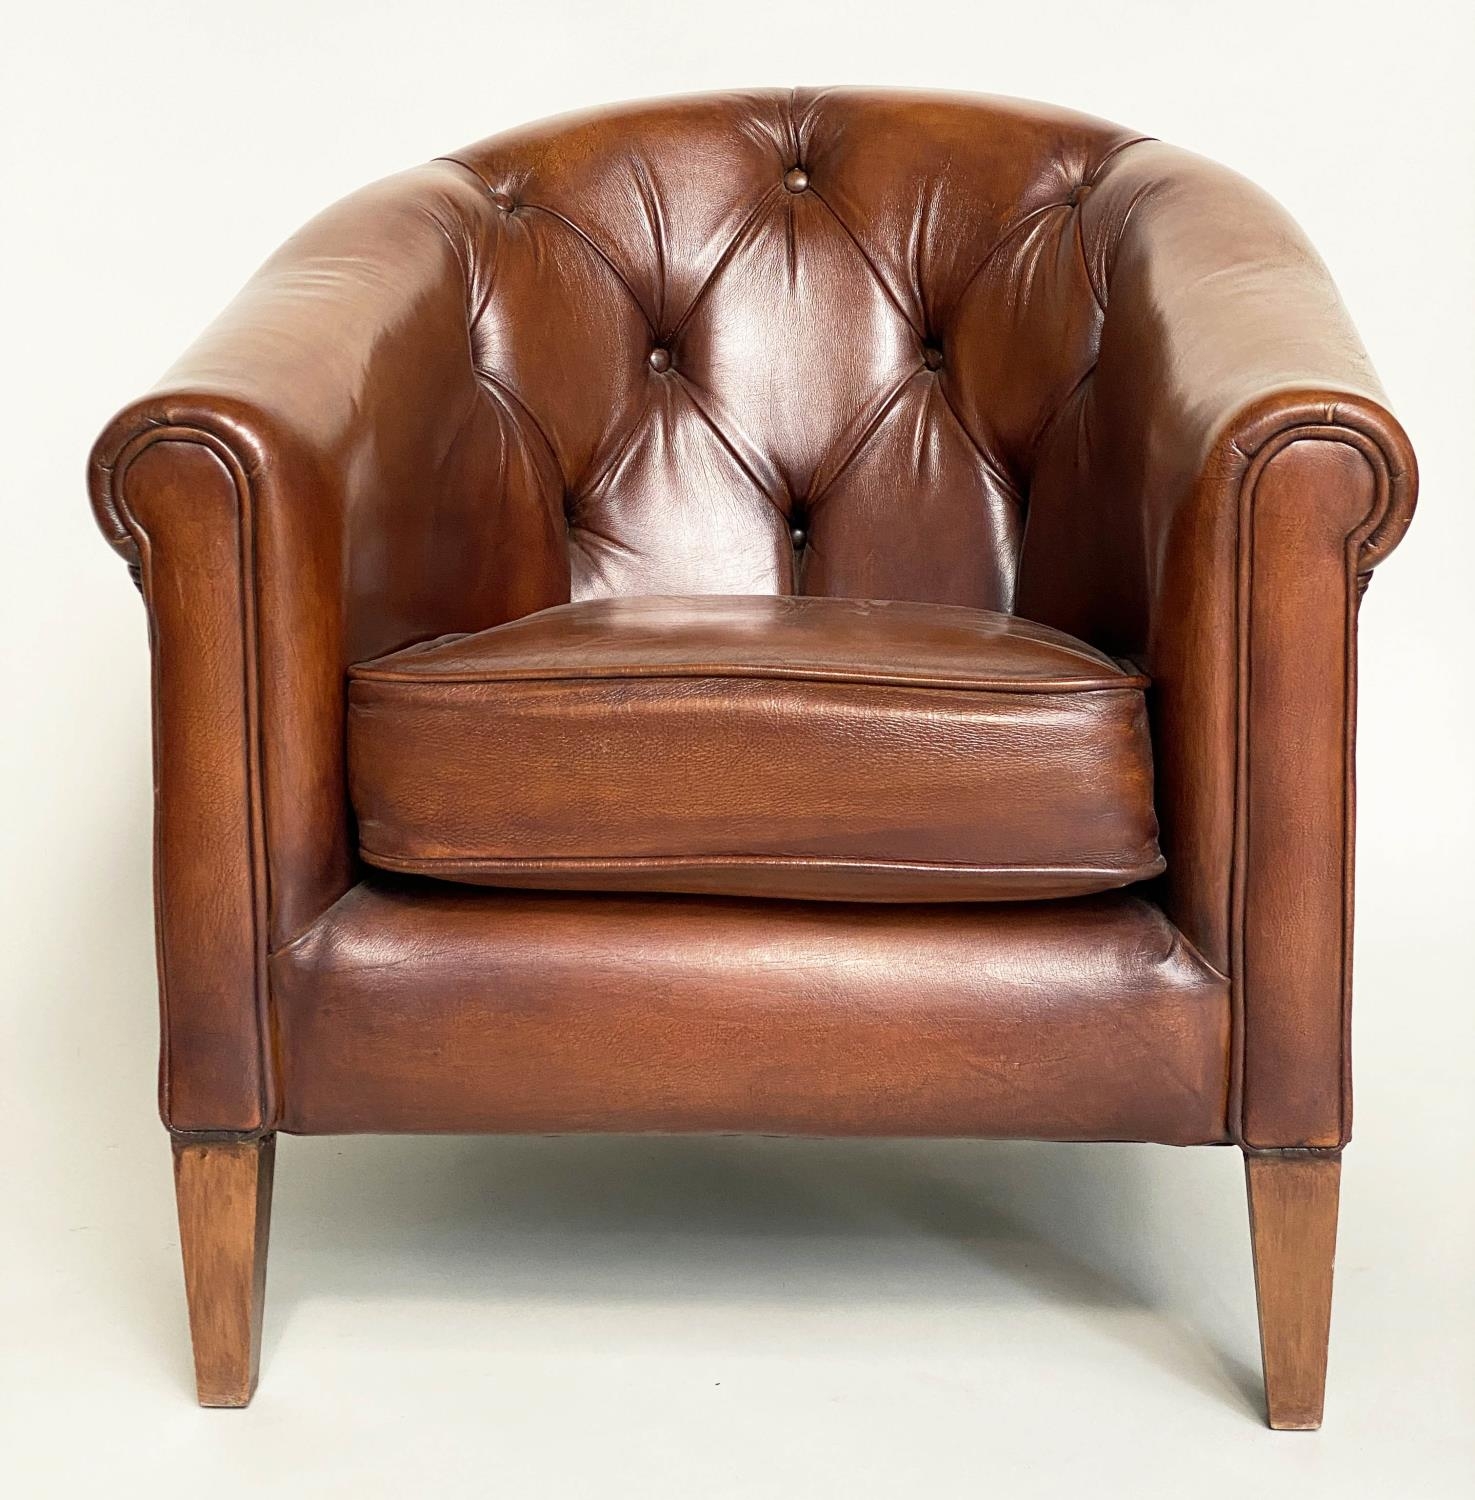 TUB ARMCHAIR BY THOMAS LLOYD, buttoned tan leather with arched back and rounded arms, 78cm W. - Image 5 of 6